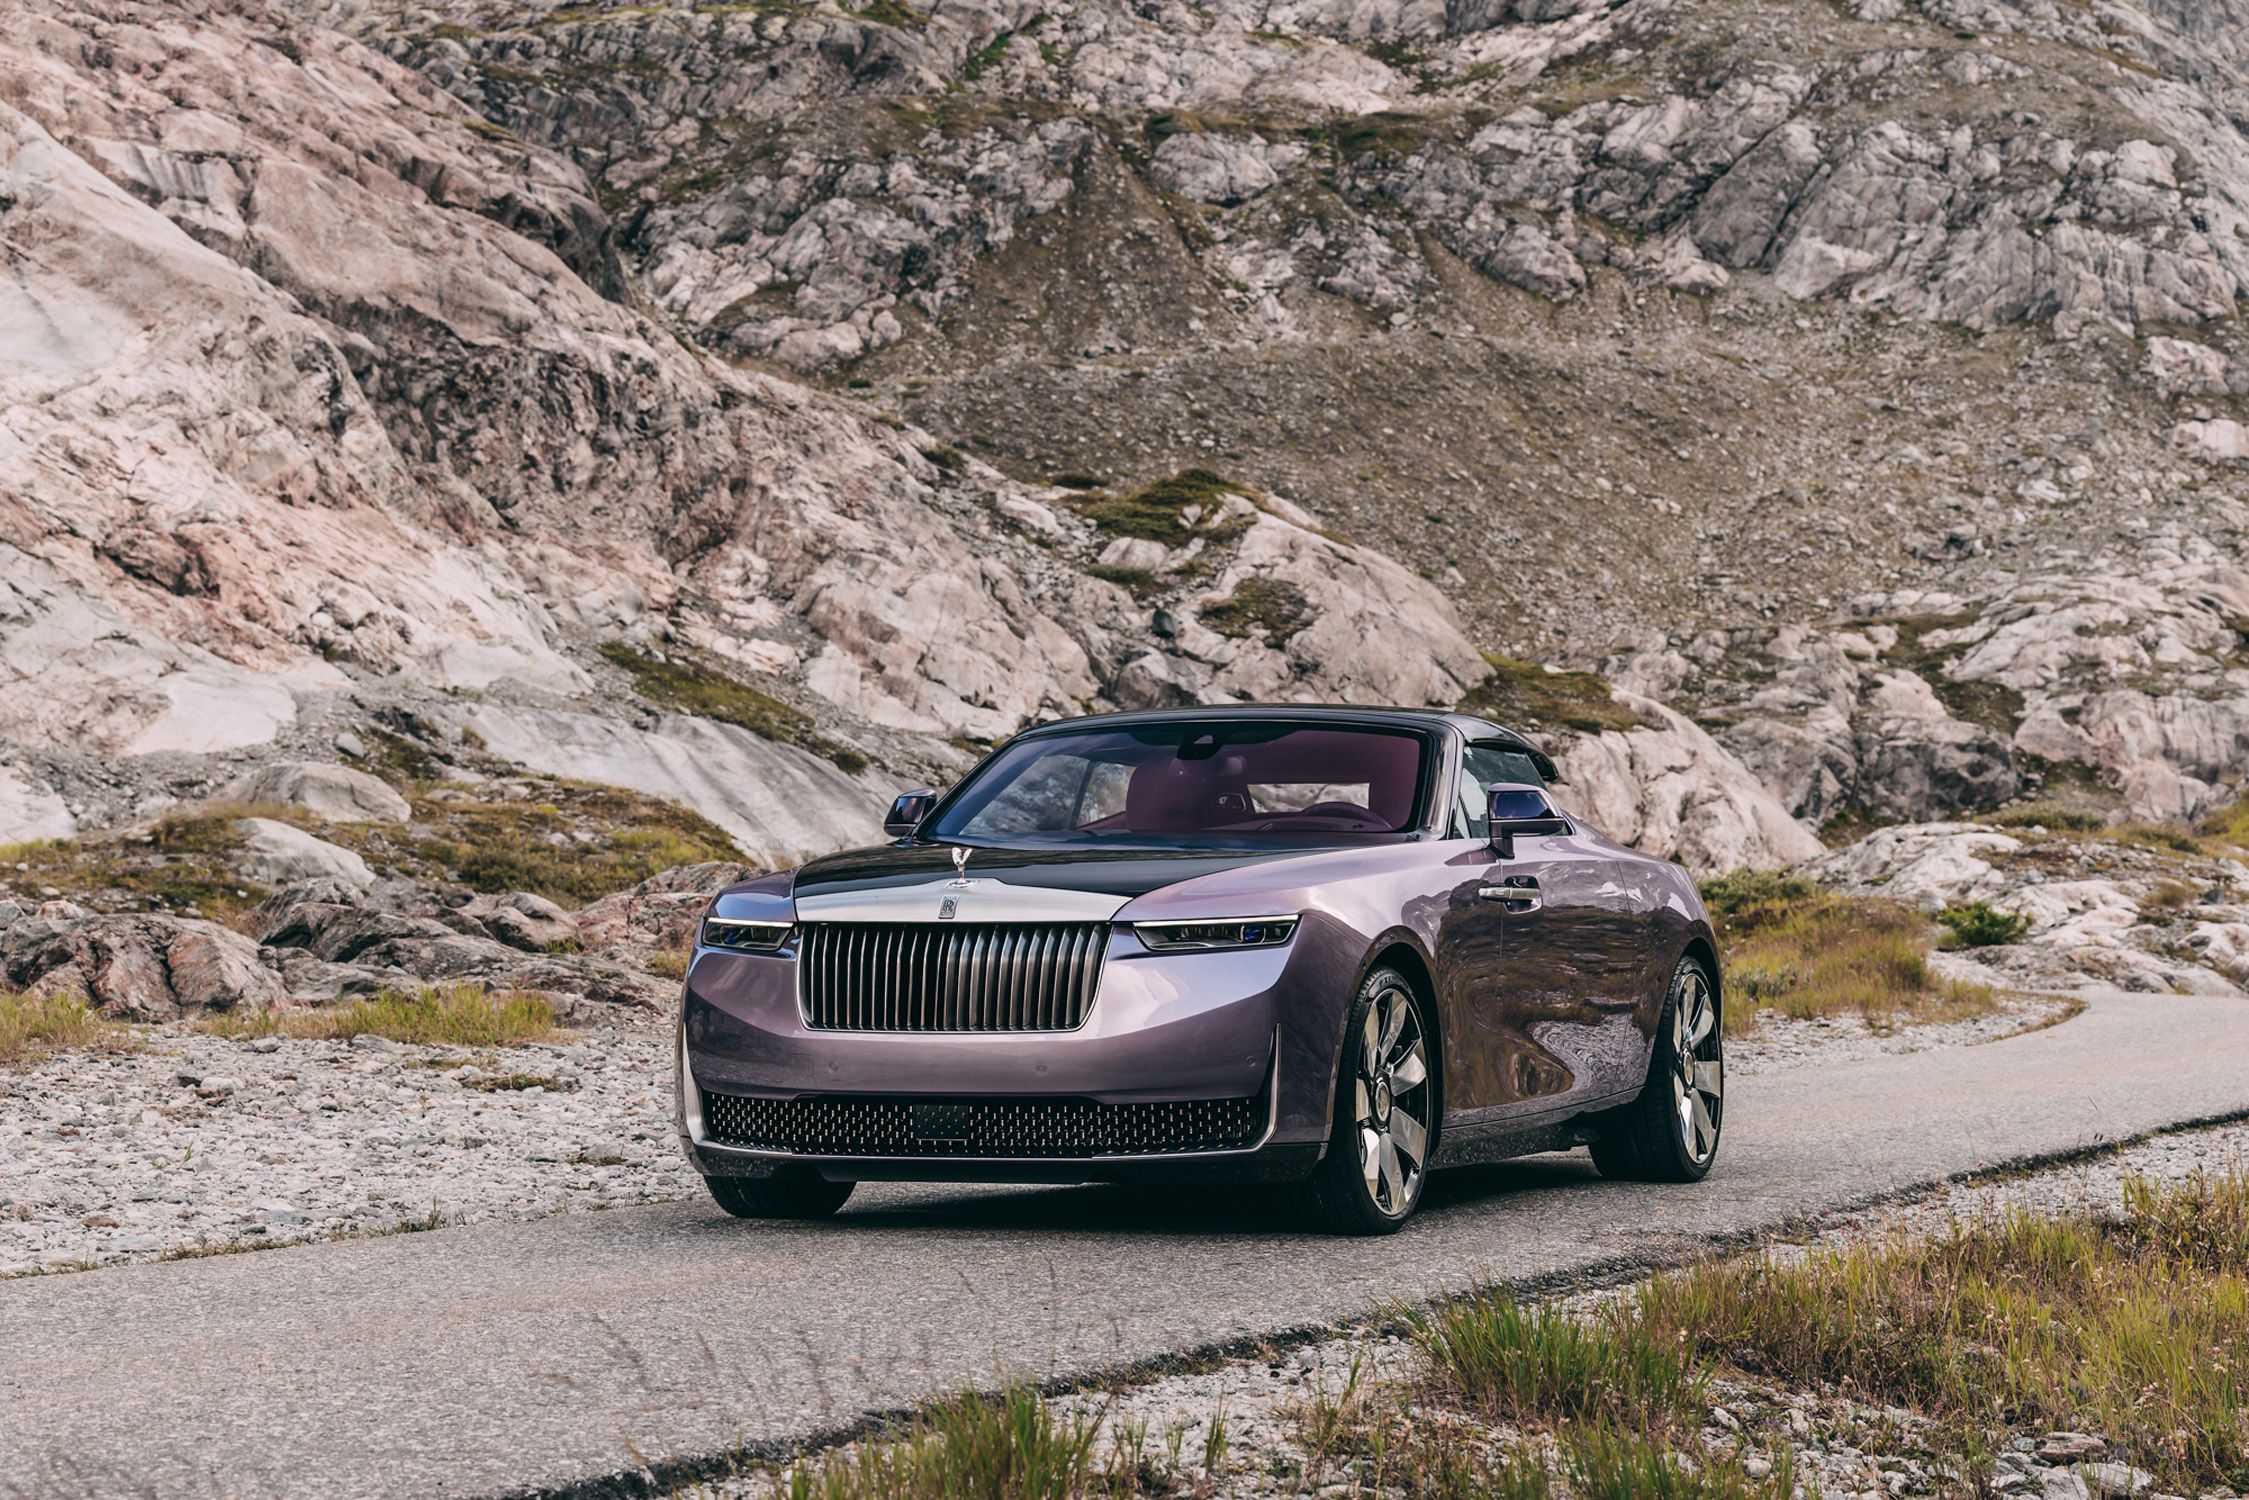 RollsRoyce Motor Cars on Twitter At salonpriveuk this weekend  RollsRoyce will showcase a highly unique RollsRoyce BlackBadge Dawn in  Iced Twilight Purple as well as host the EU premiere of Ghost Zenith